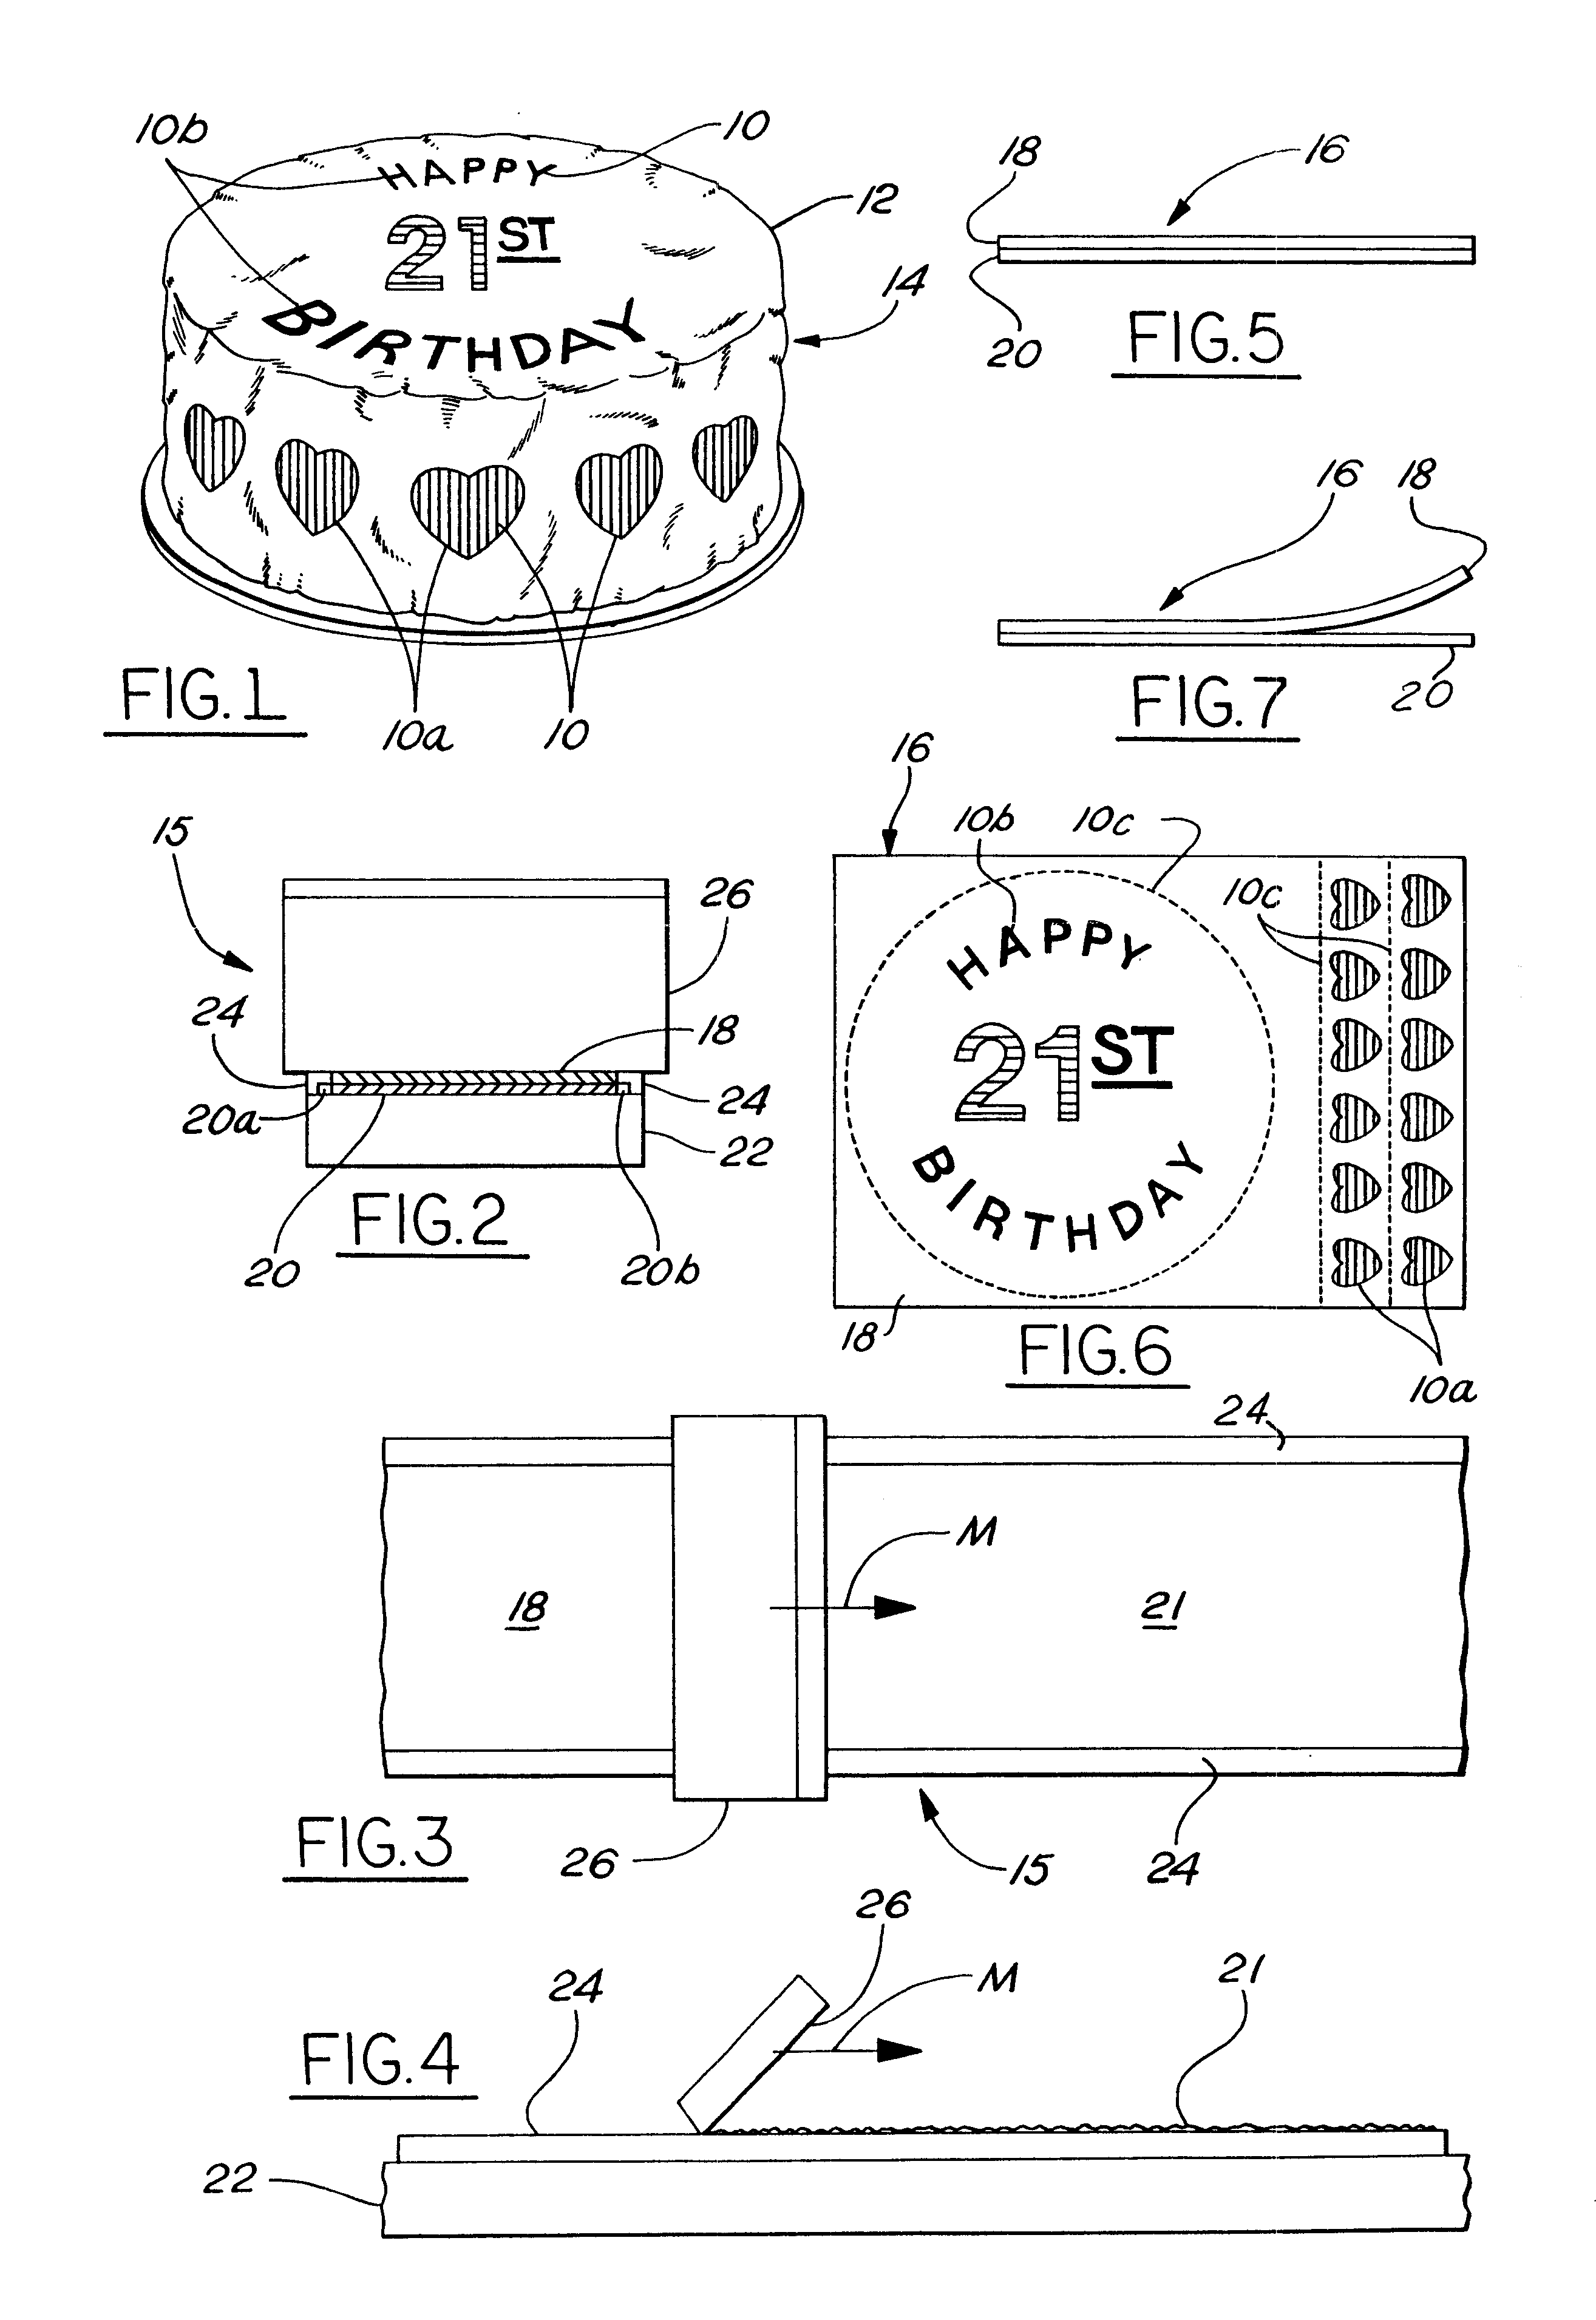 Method of making and using an edible film for decorating foodstuffs